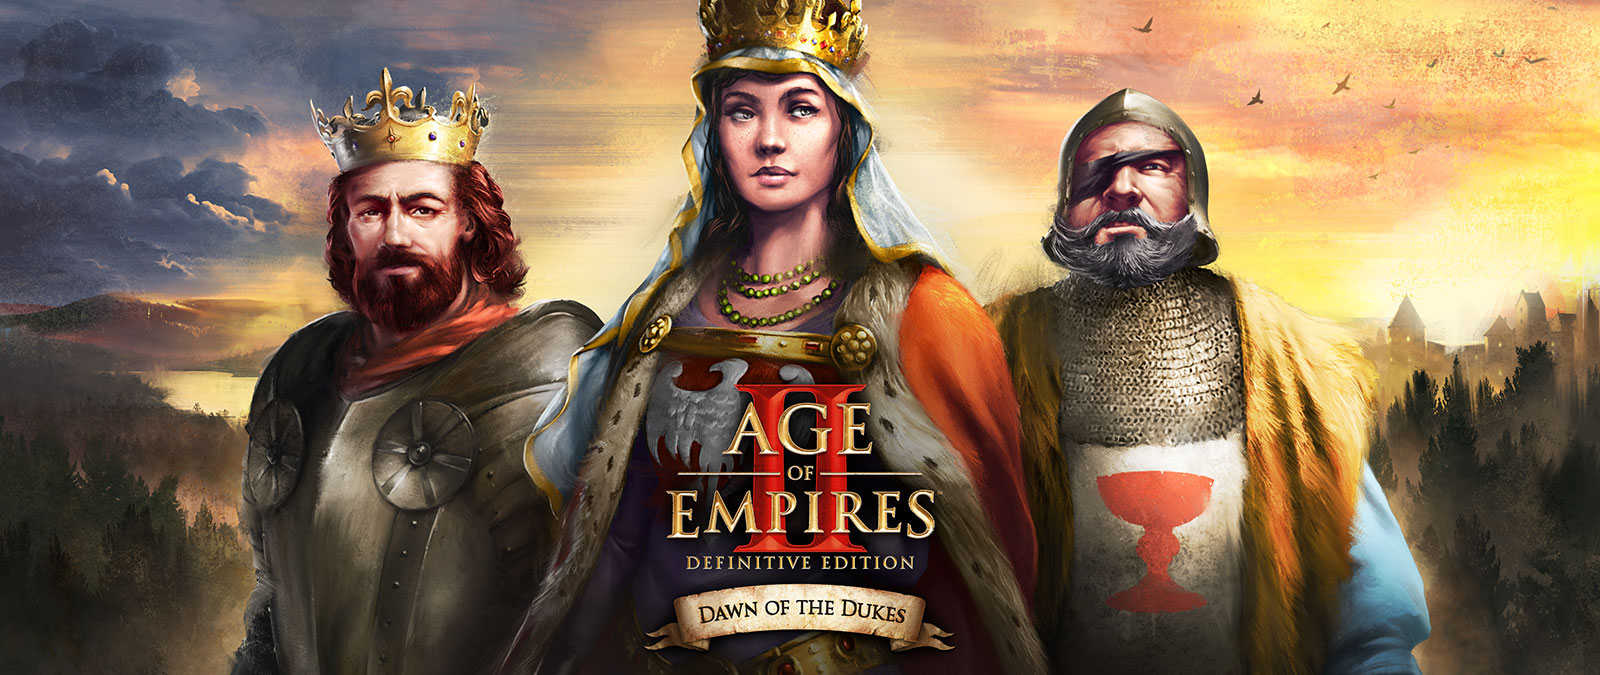 age of empires definitive edition xbox